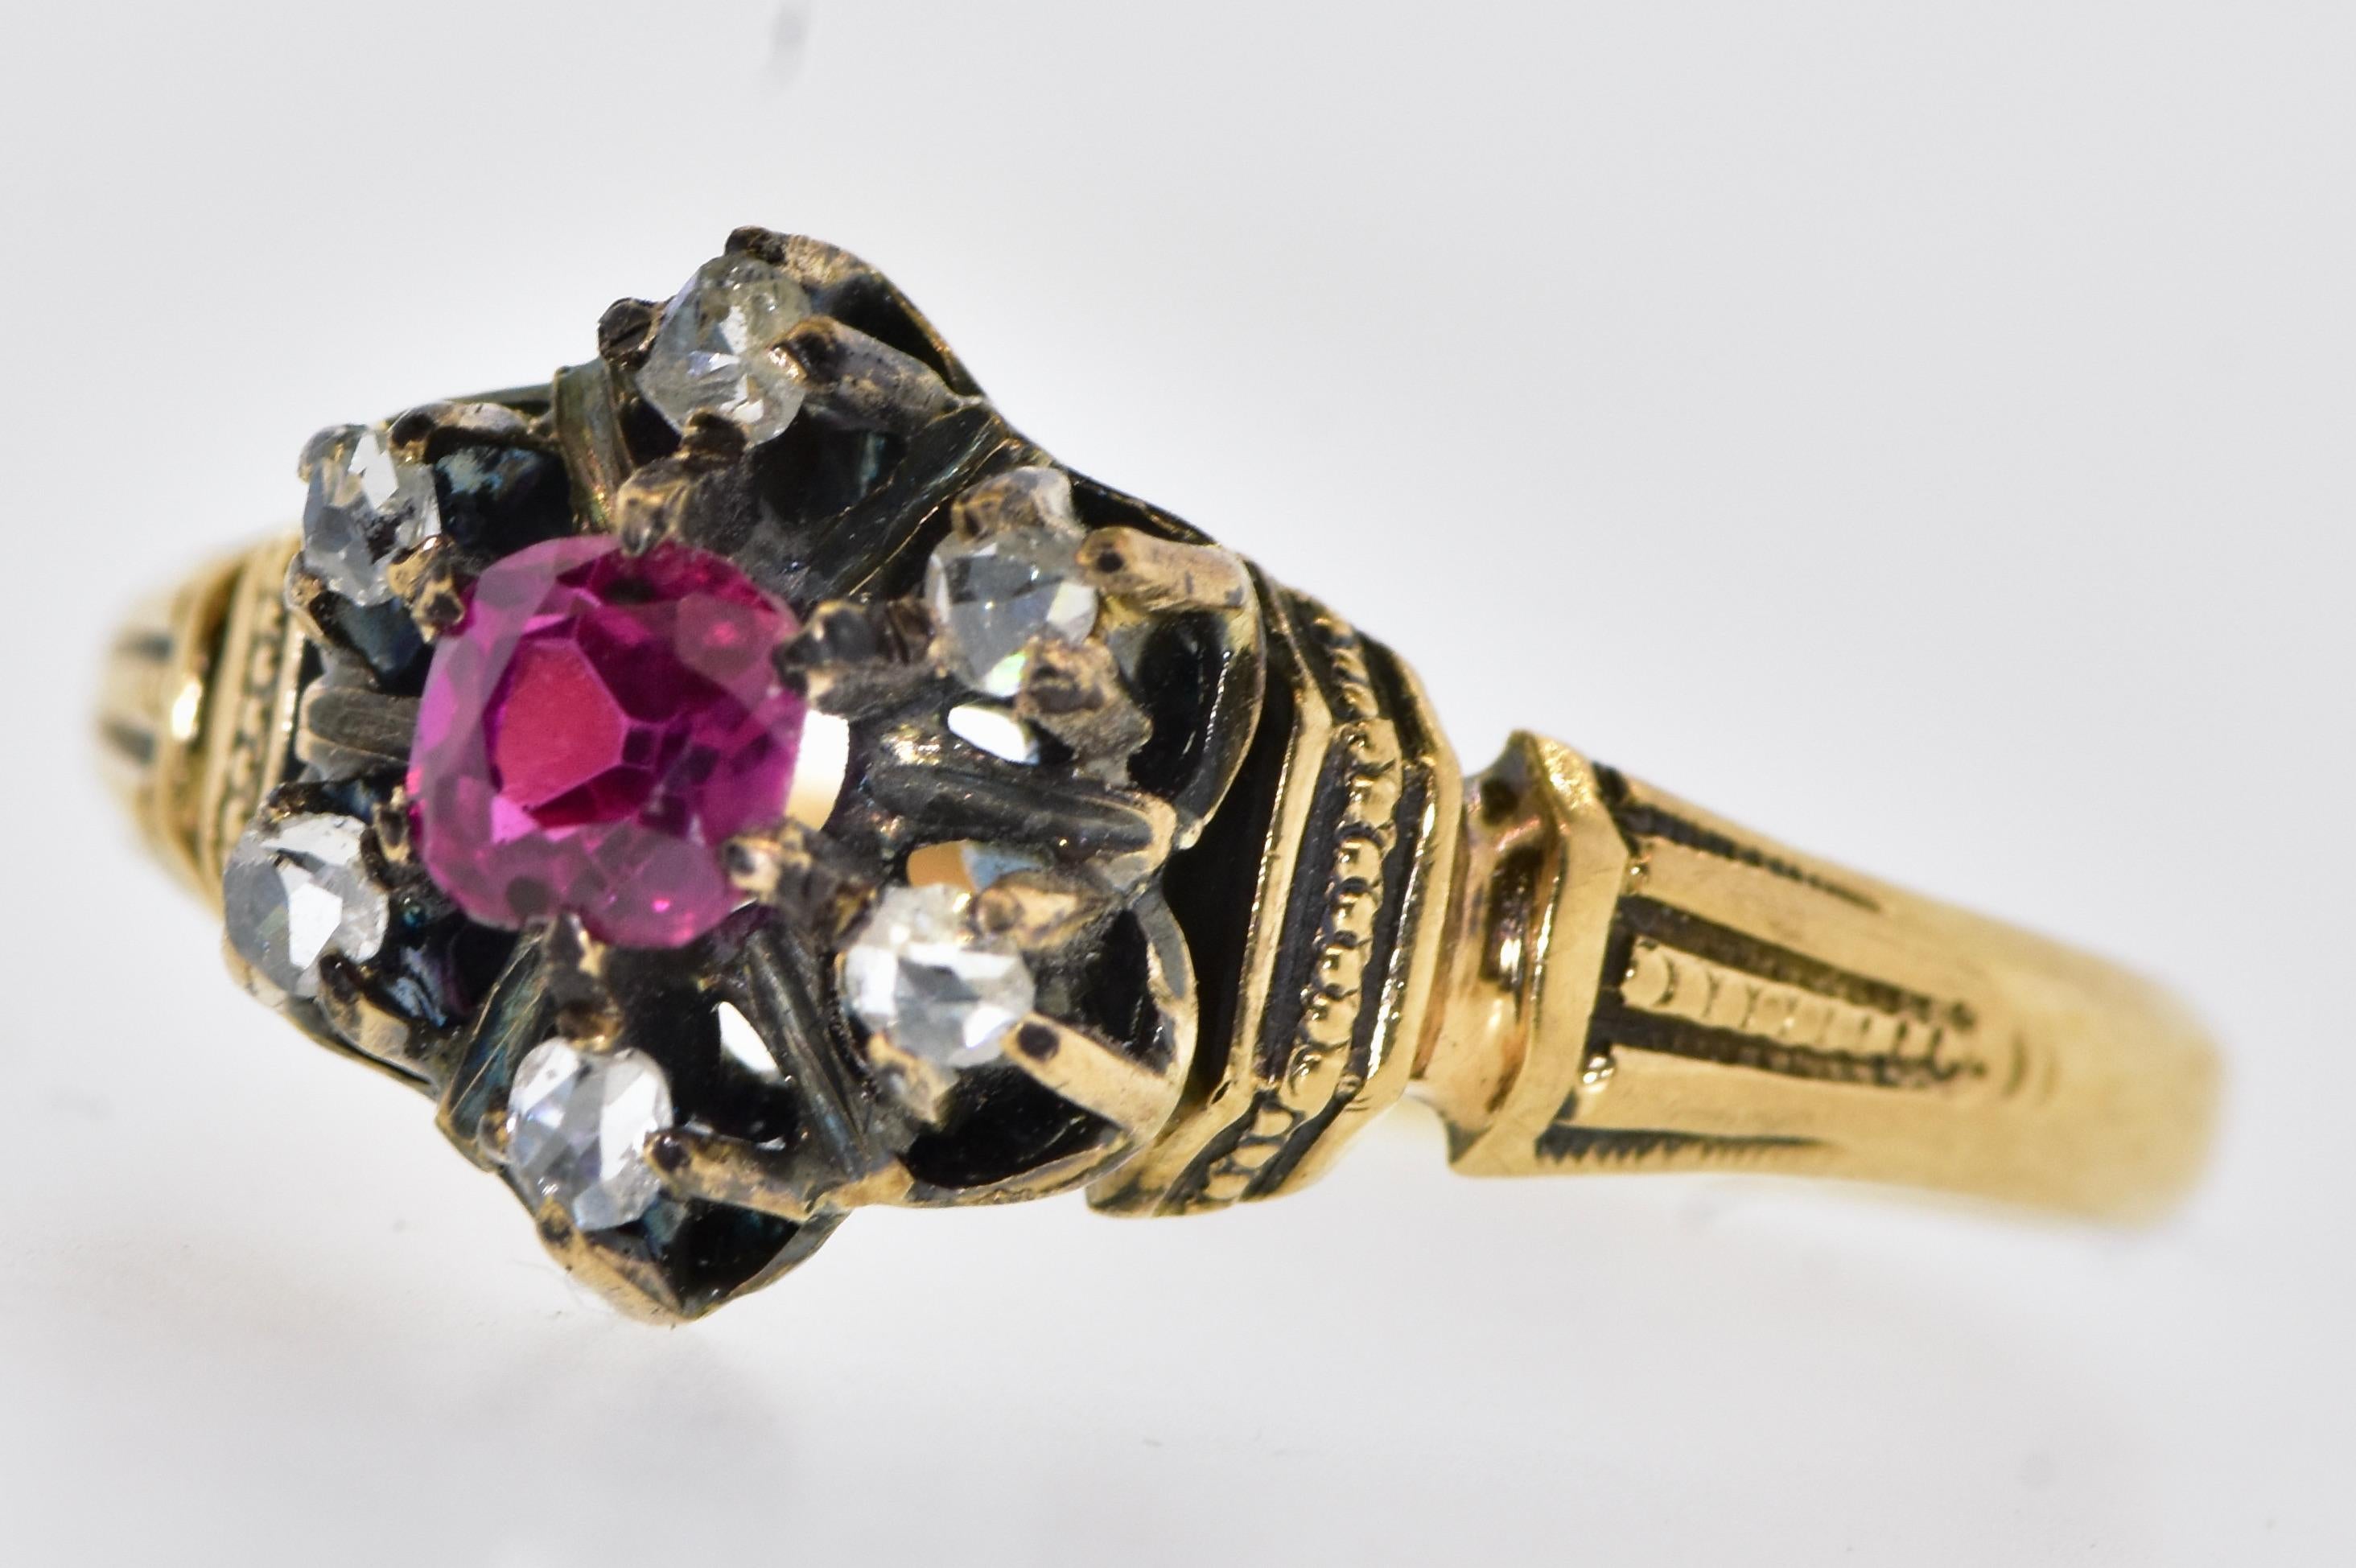 Antique diamond and ruby ring.  Probably made in America, this minor masterpiece composed of 6 small prong set rose cut diamonds encircle a natural bright red ruby, probably from Burma.  This old mine cut stone has fine clarity and is a very pretty